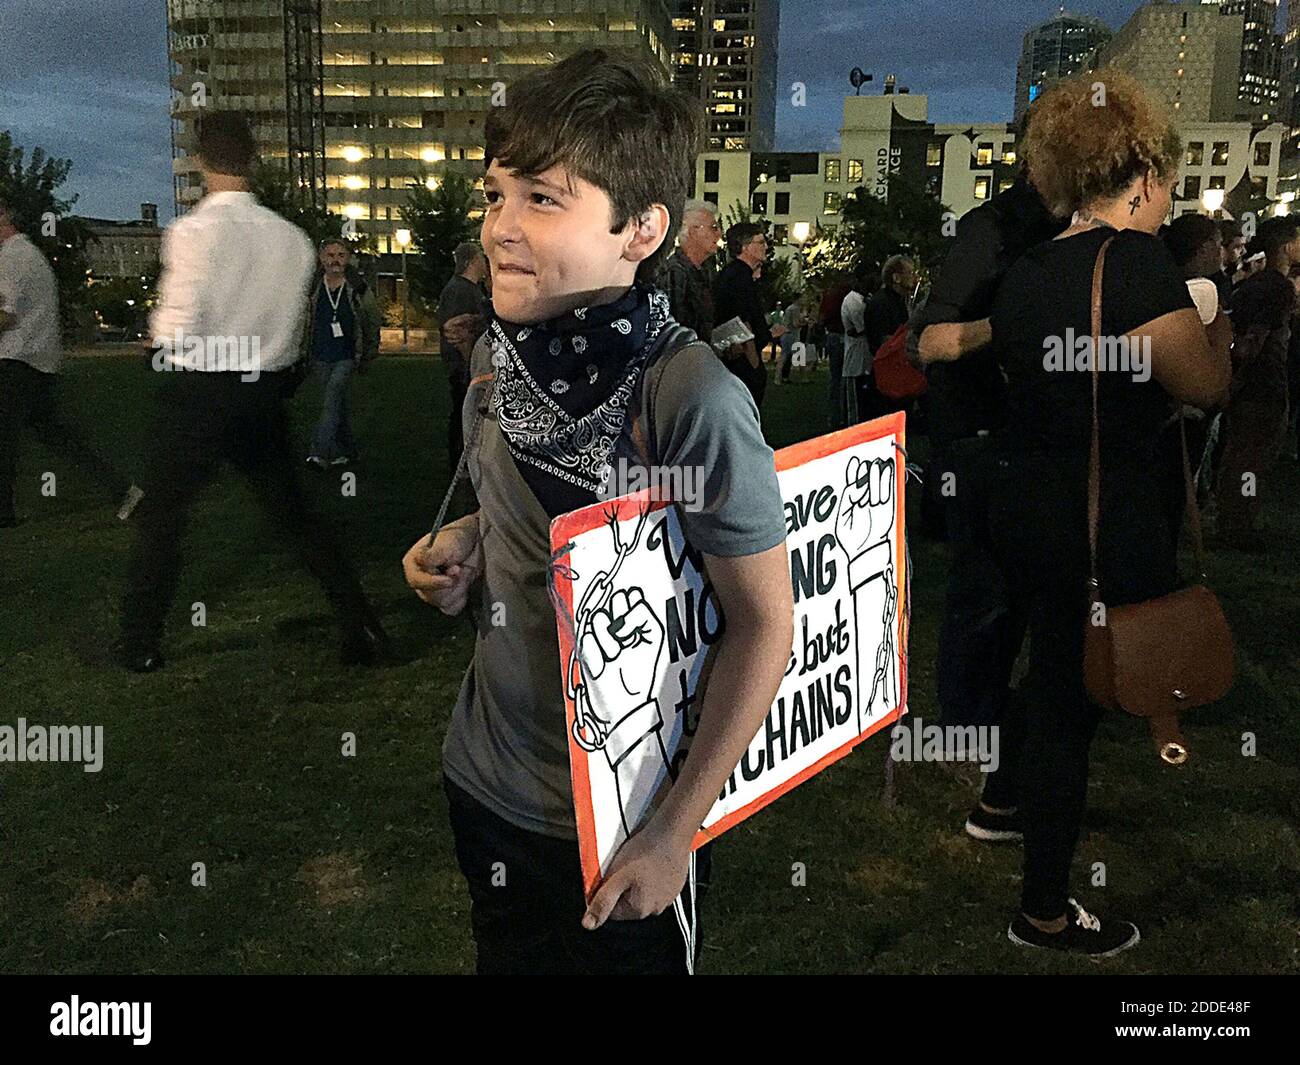 NO FILM, NO VIDEO, NO TV, NO DOCUMENTARY - Eleven-year-old Ethan Julian of Greensboro, N.C., at Romare Bearden Park in Charlotte, NC, USA, on Thursday, September 22, 2016. Photo by Jeff Siner/Charlotte Observer/TNS/ABACAPRESS.COM Stock Photo